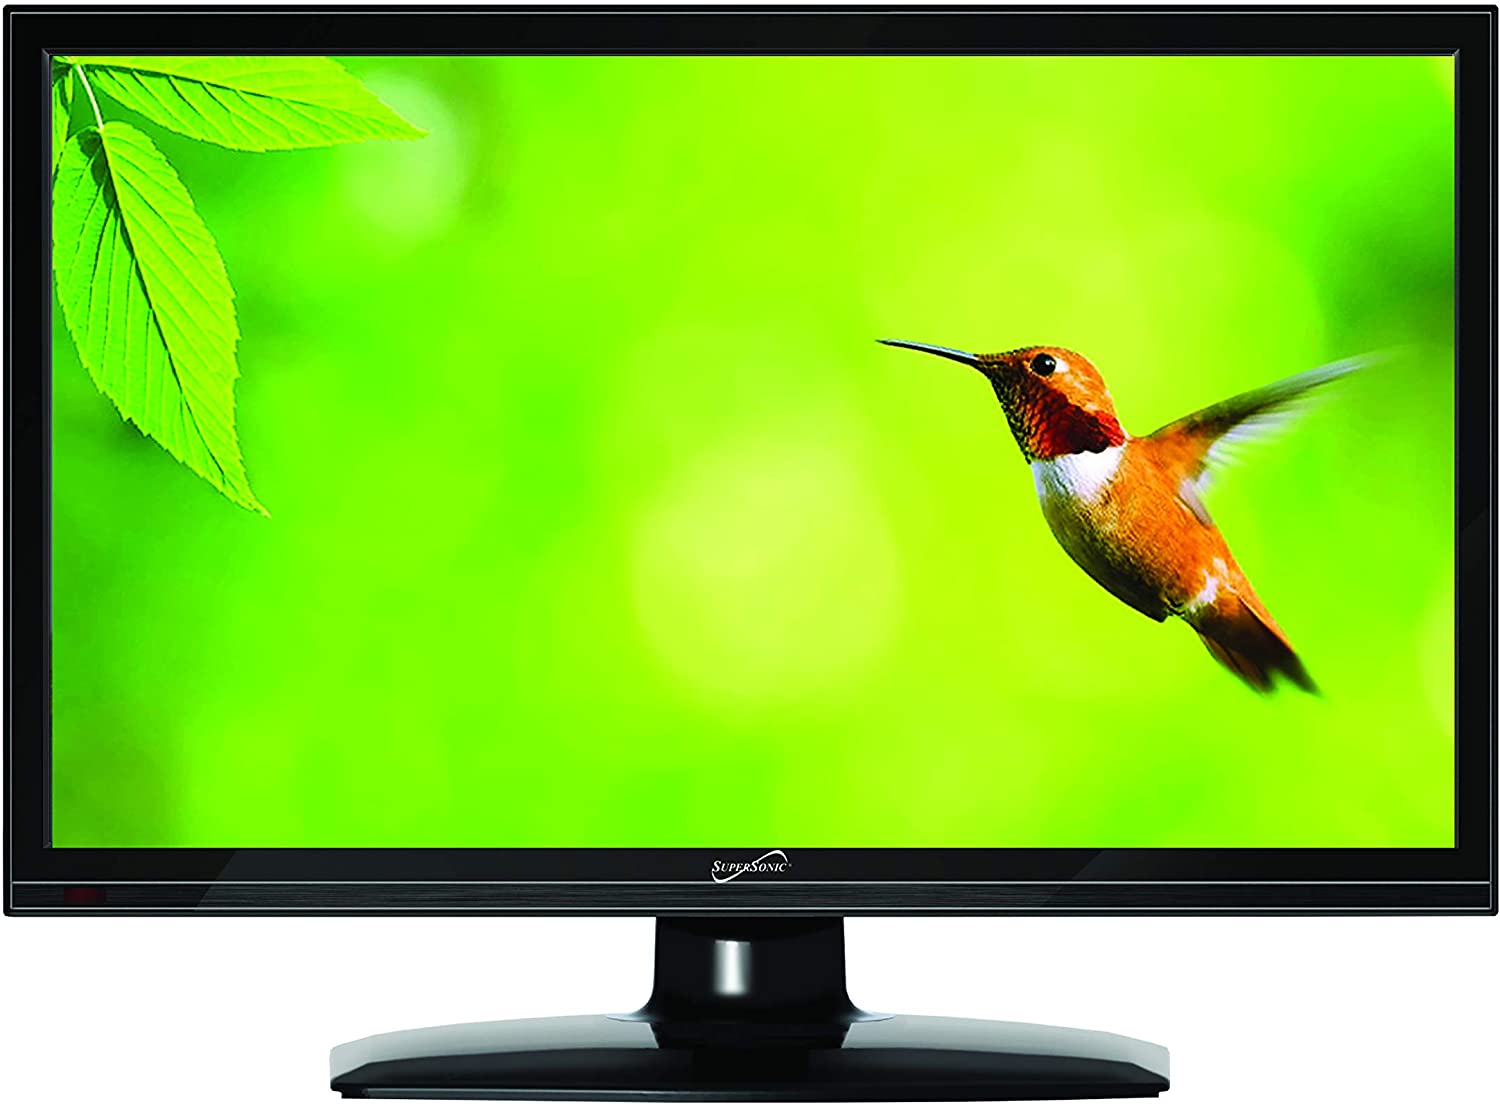 Supersonic SC-1511 15.6" 720p TV LED HDTV(Refurbished) Tv's ONLY for delivery in San Diego and Tijuana